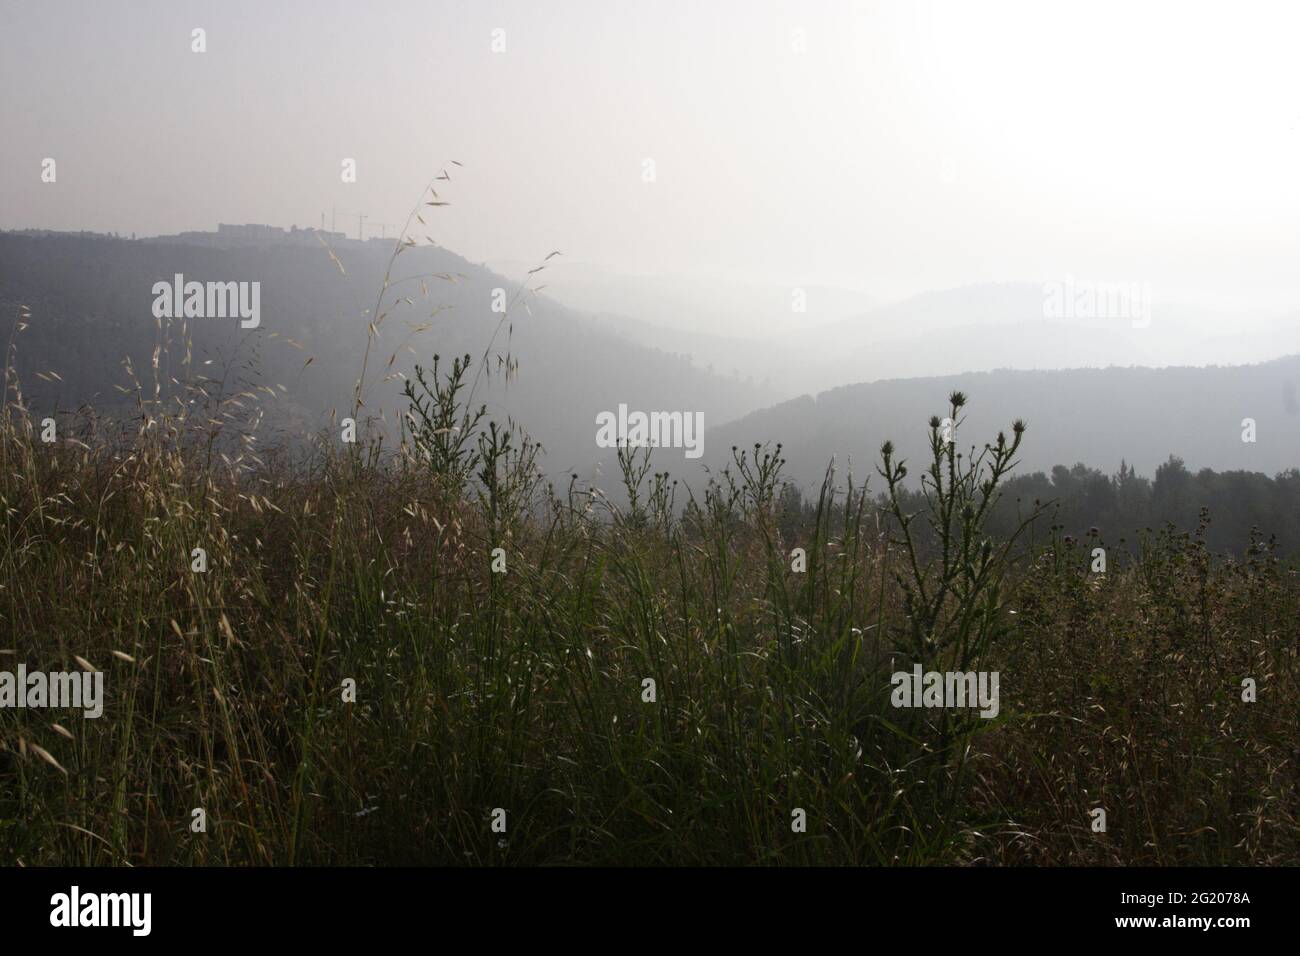 Judean Mountains, Biblical scene, Pine Tree forests, drying plants under morning fog shot against the sun as seen from Kisalon west of Jerusalem. Stock Photo